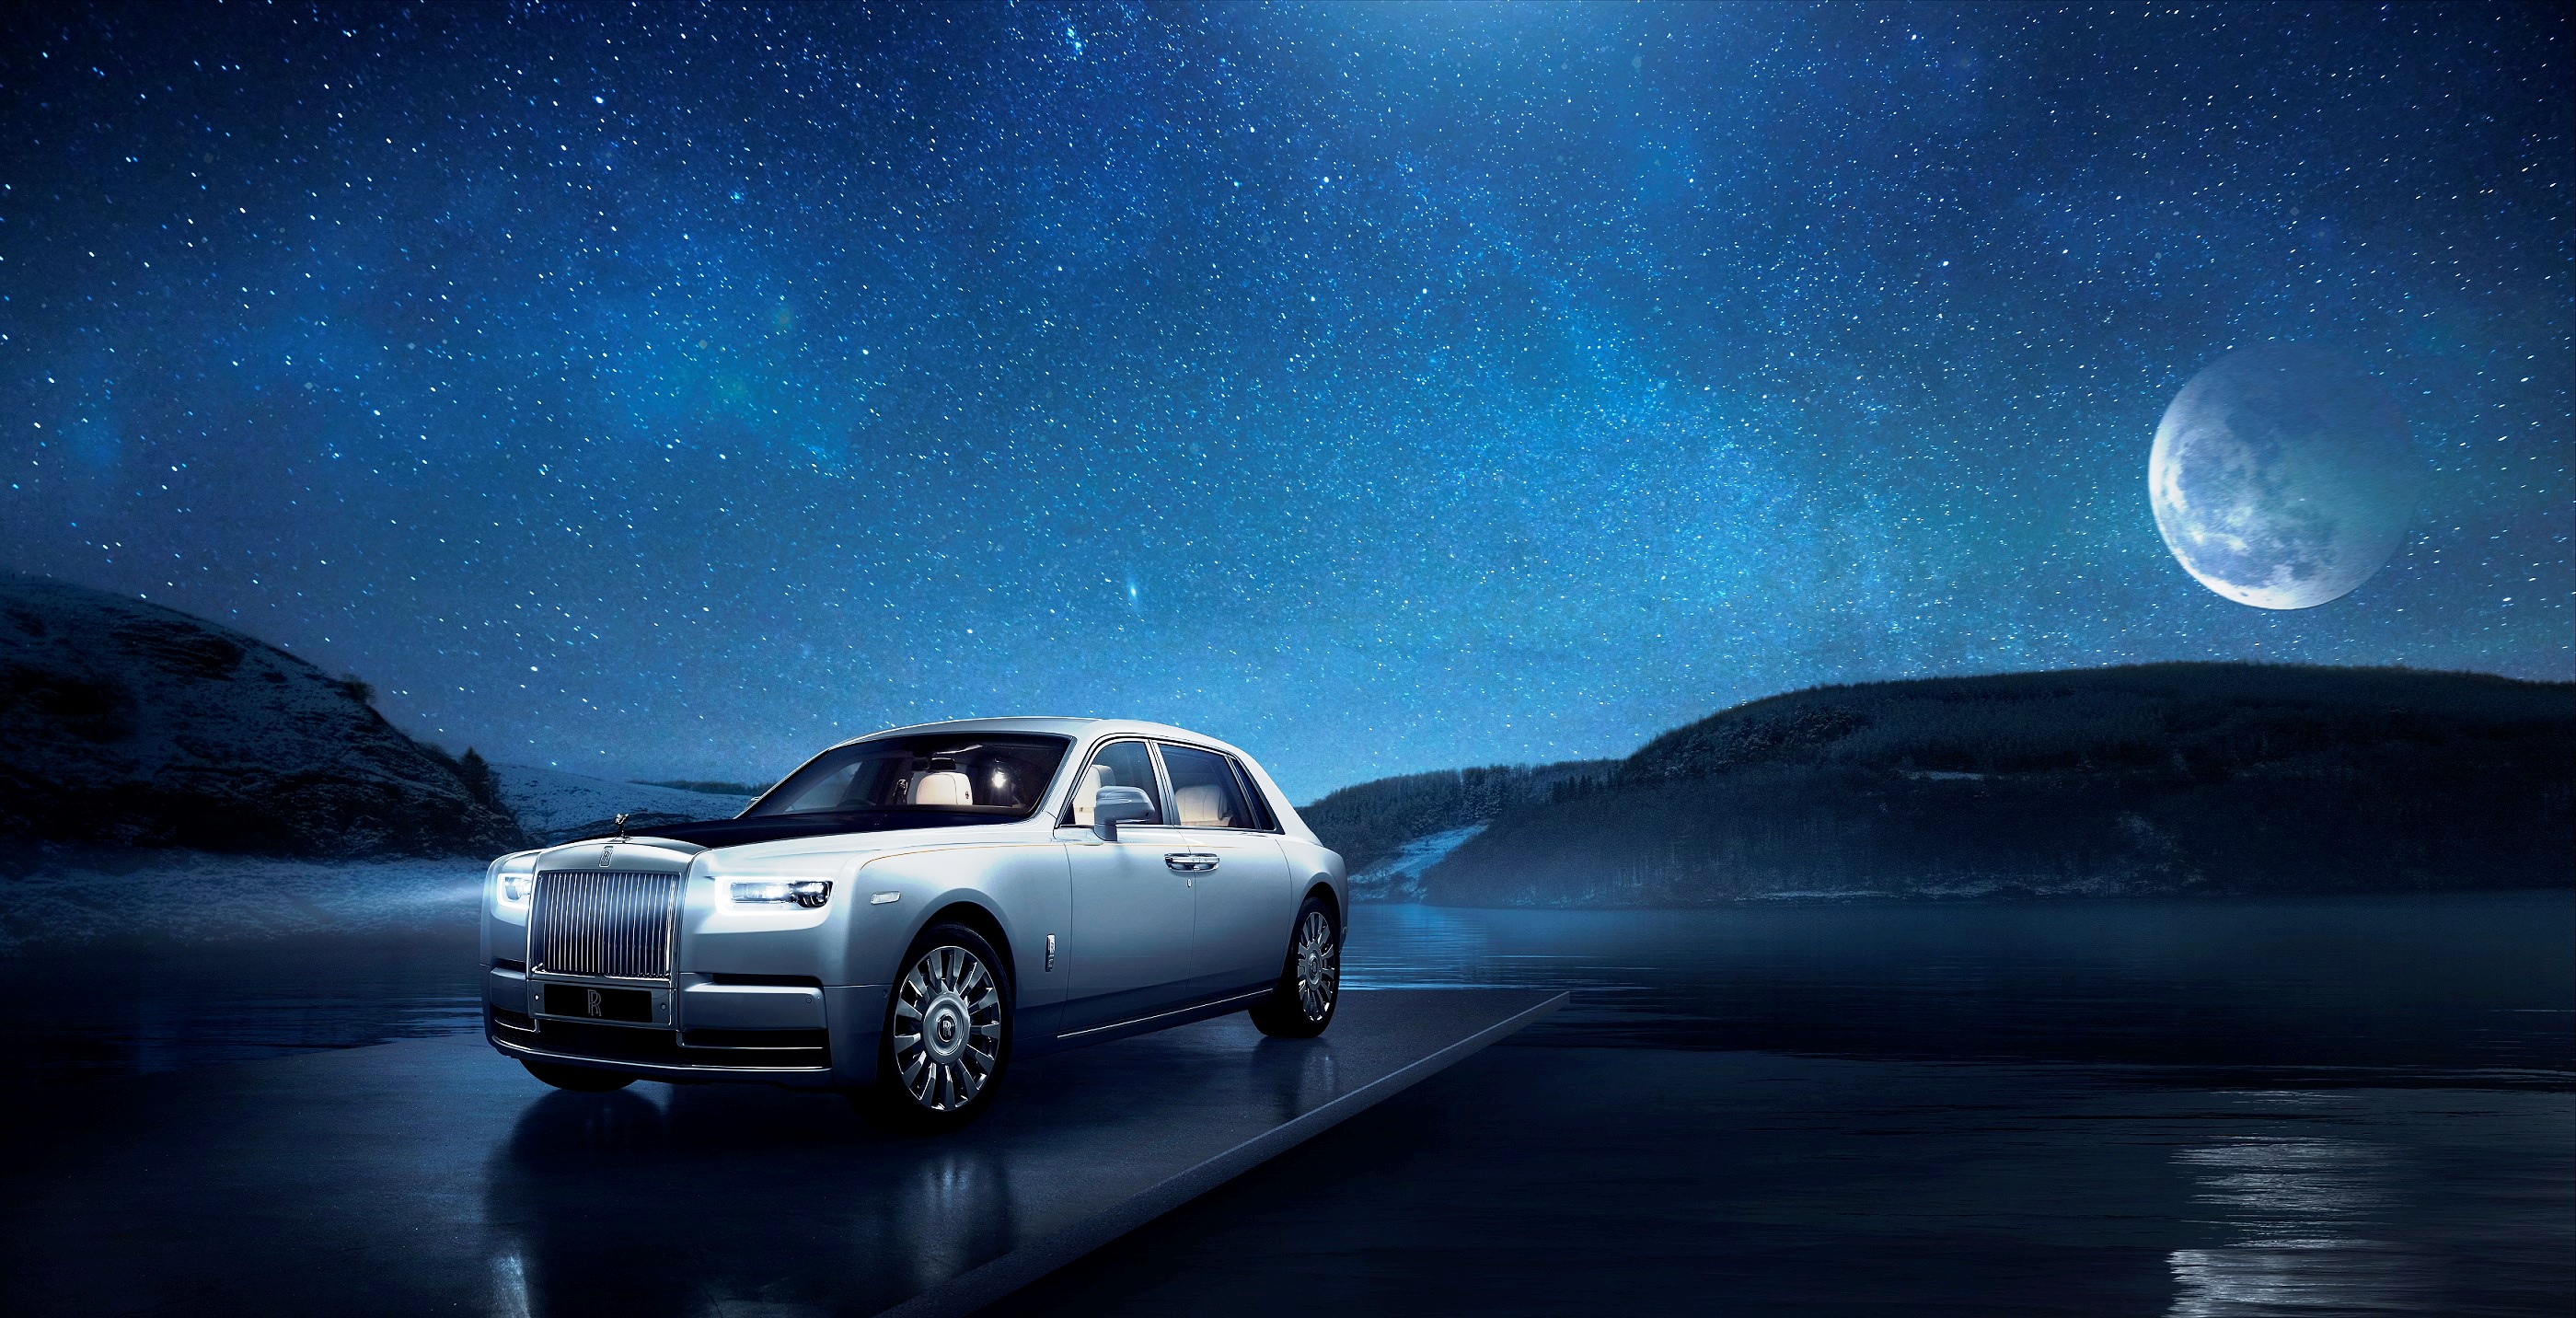 Rolls-Royce Showcases the Most Recent Interpretation of Their Motoring Expertise in the Shape of the Latest, Bespoke Phantom Tranquillity